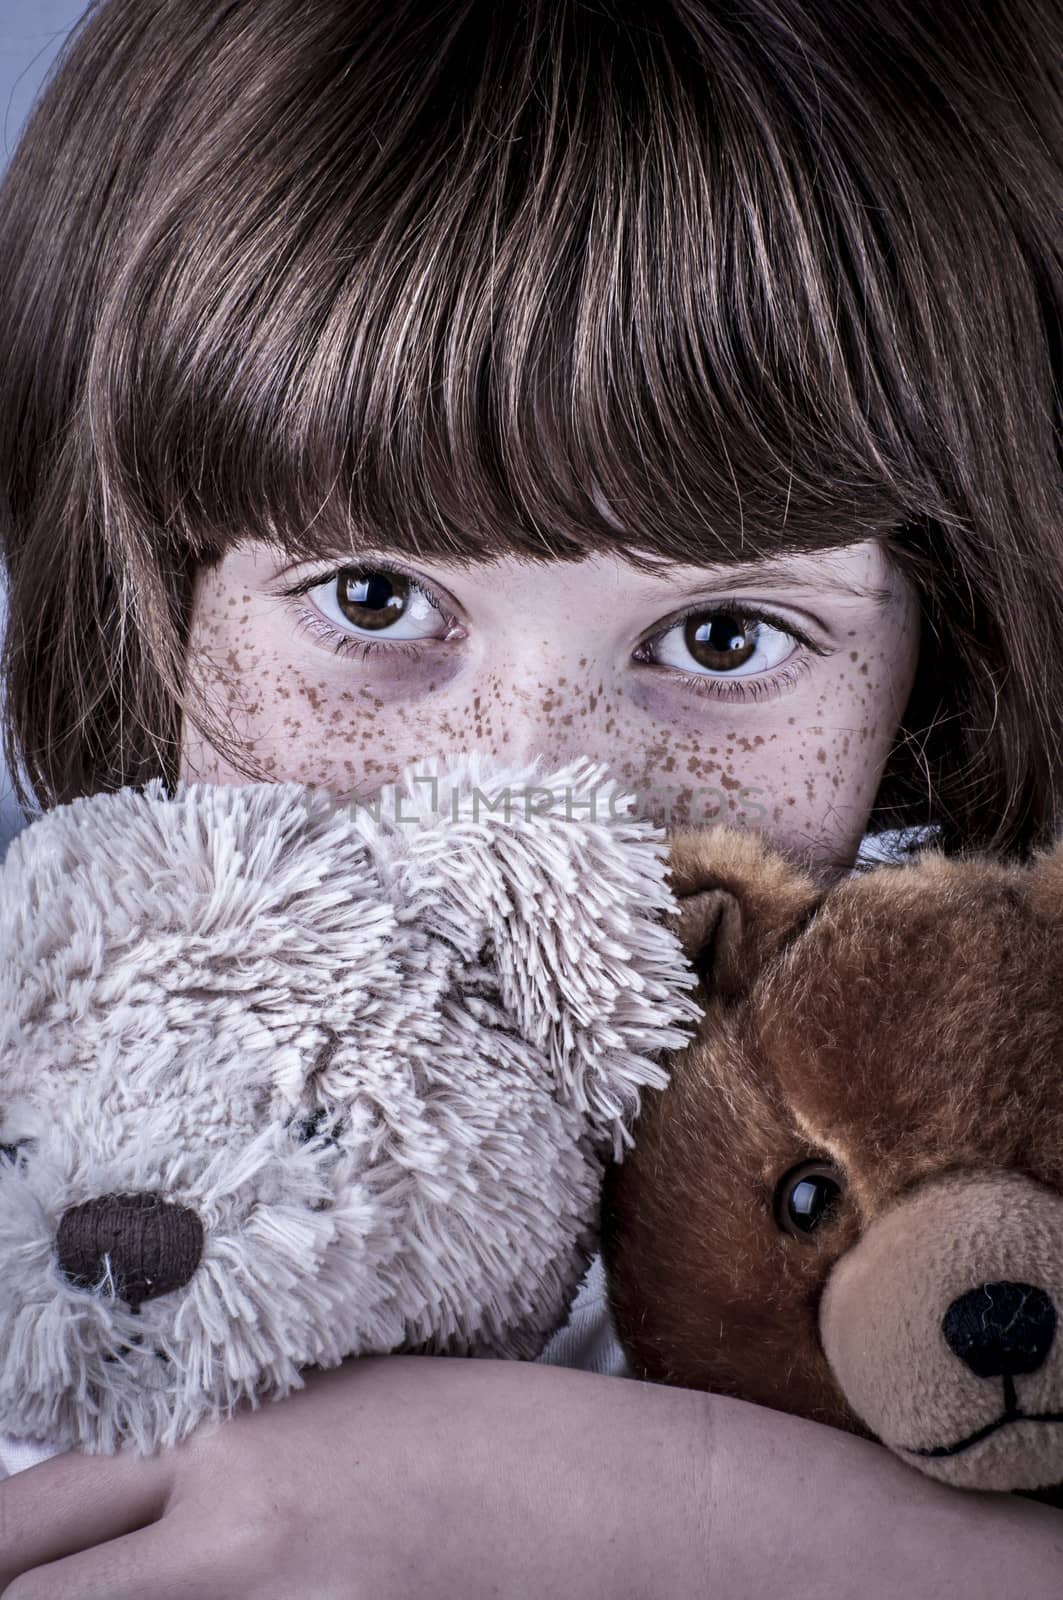 girl with freckles and two stuffed animals, teddy bears by FernandoCortes